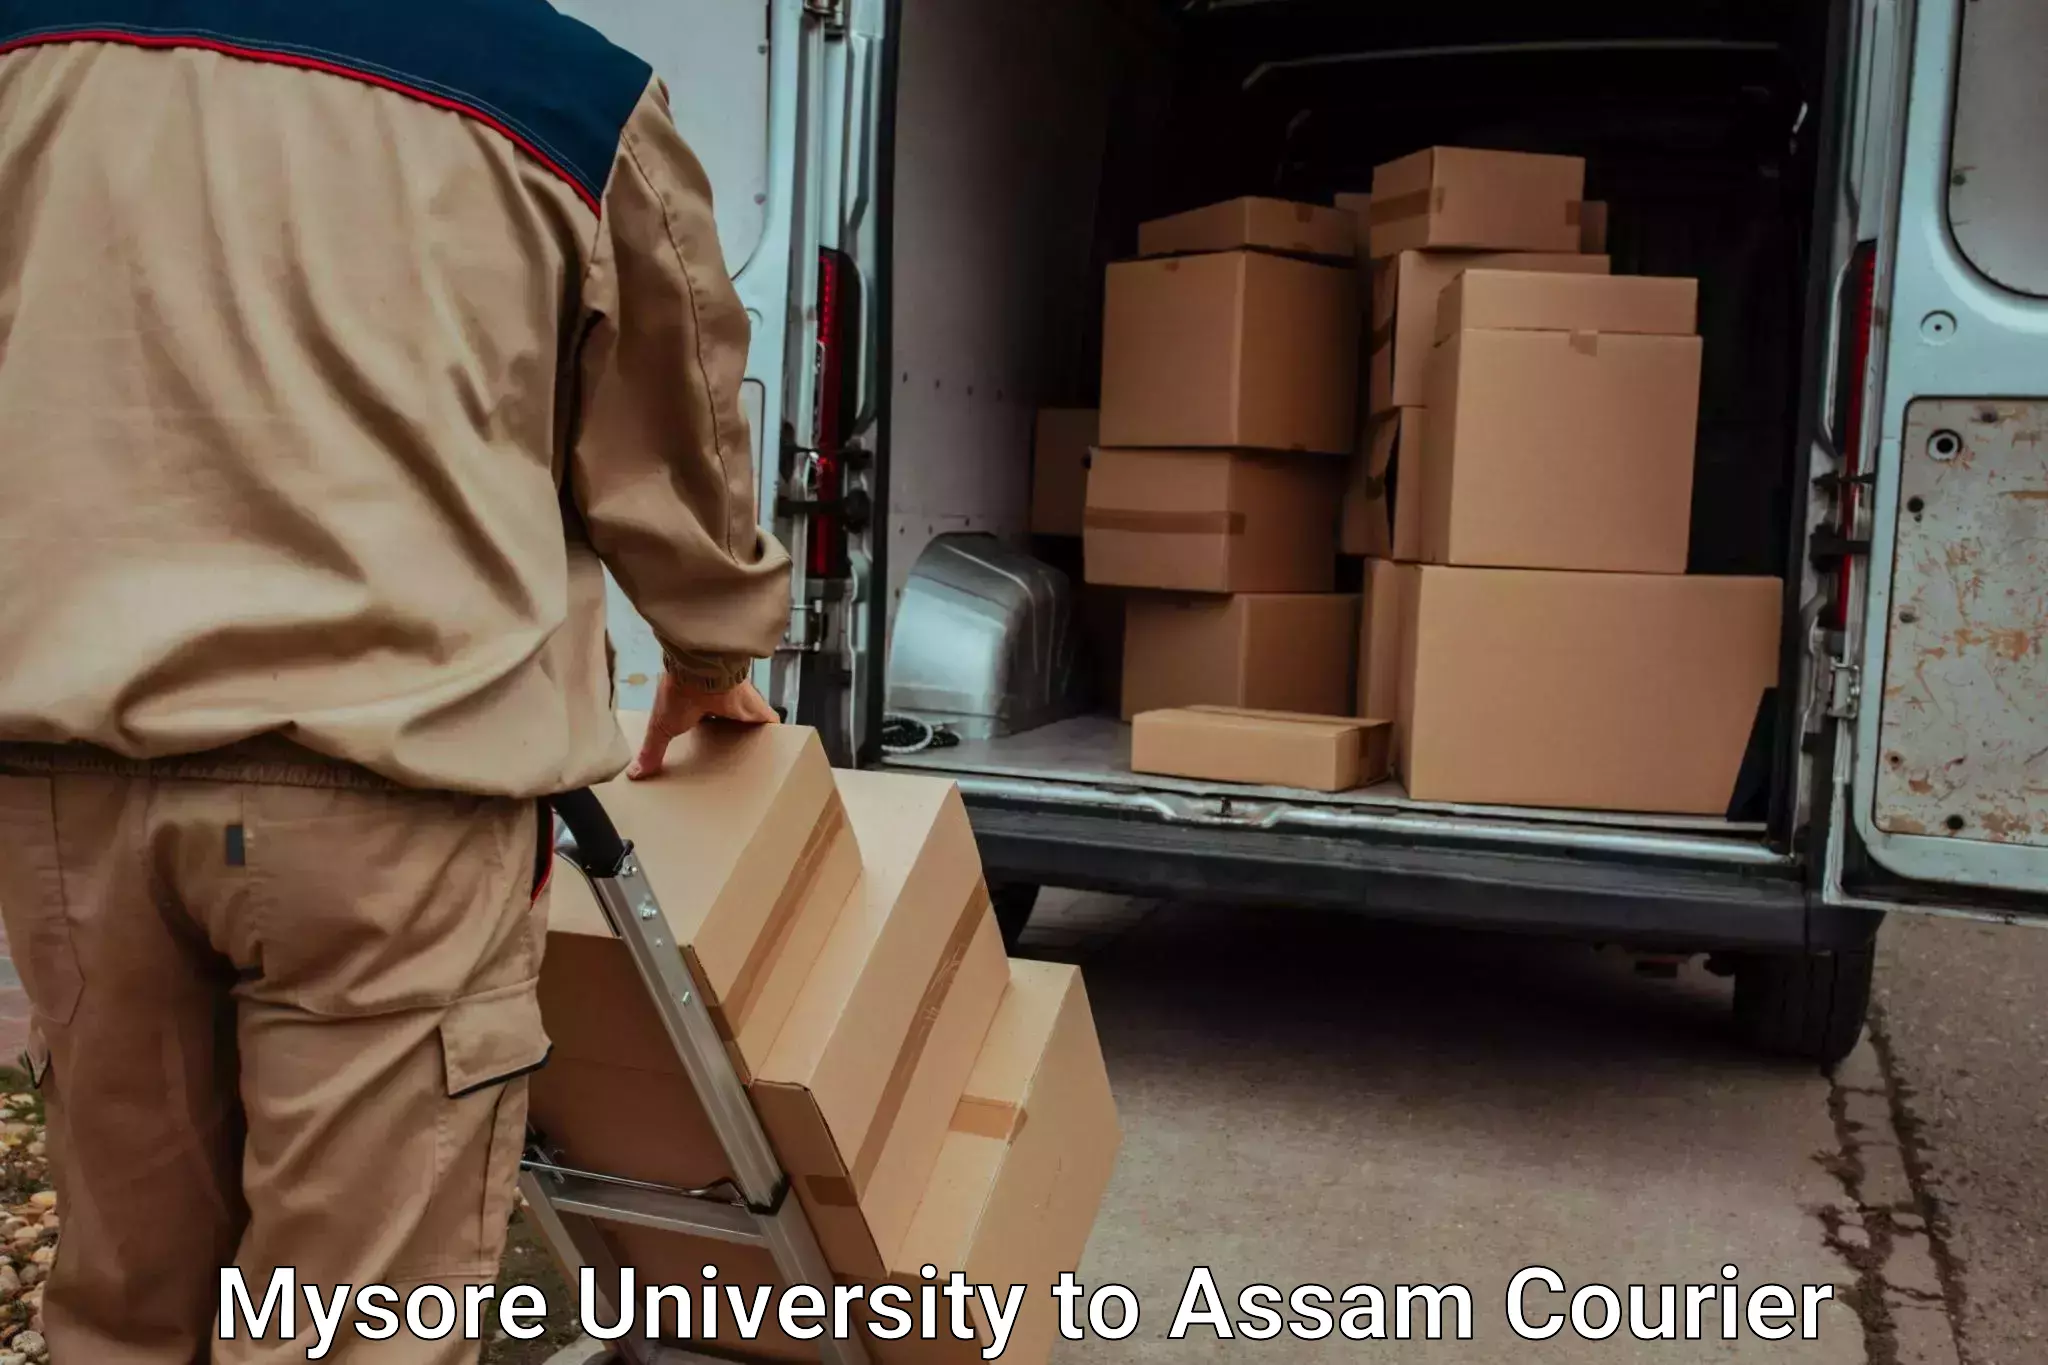 Furniture delivery service in Mysore University to Guwahati University